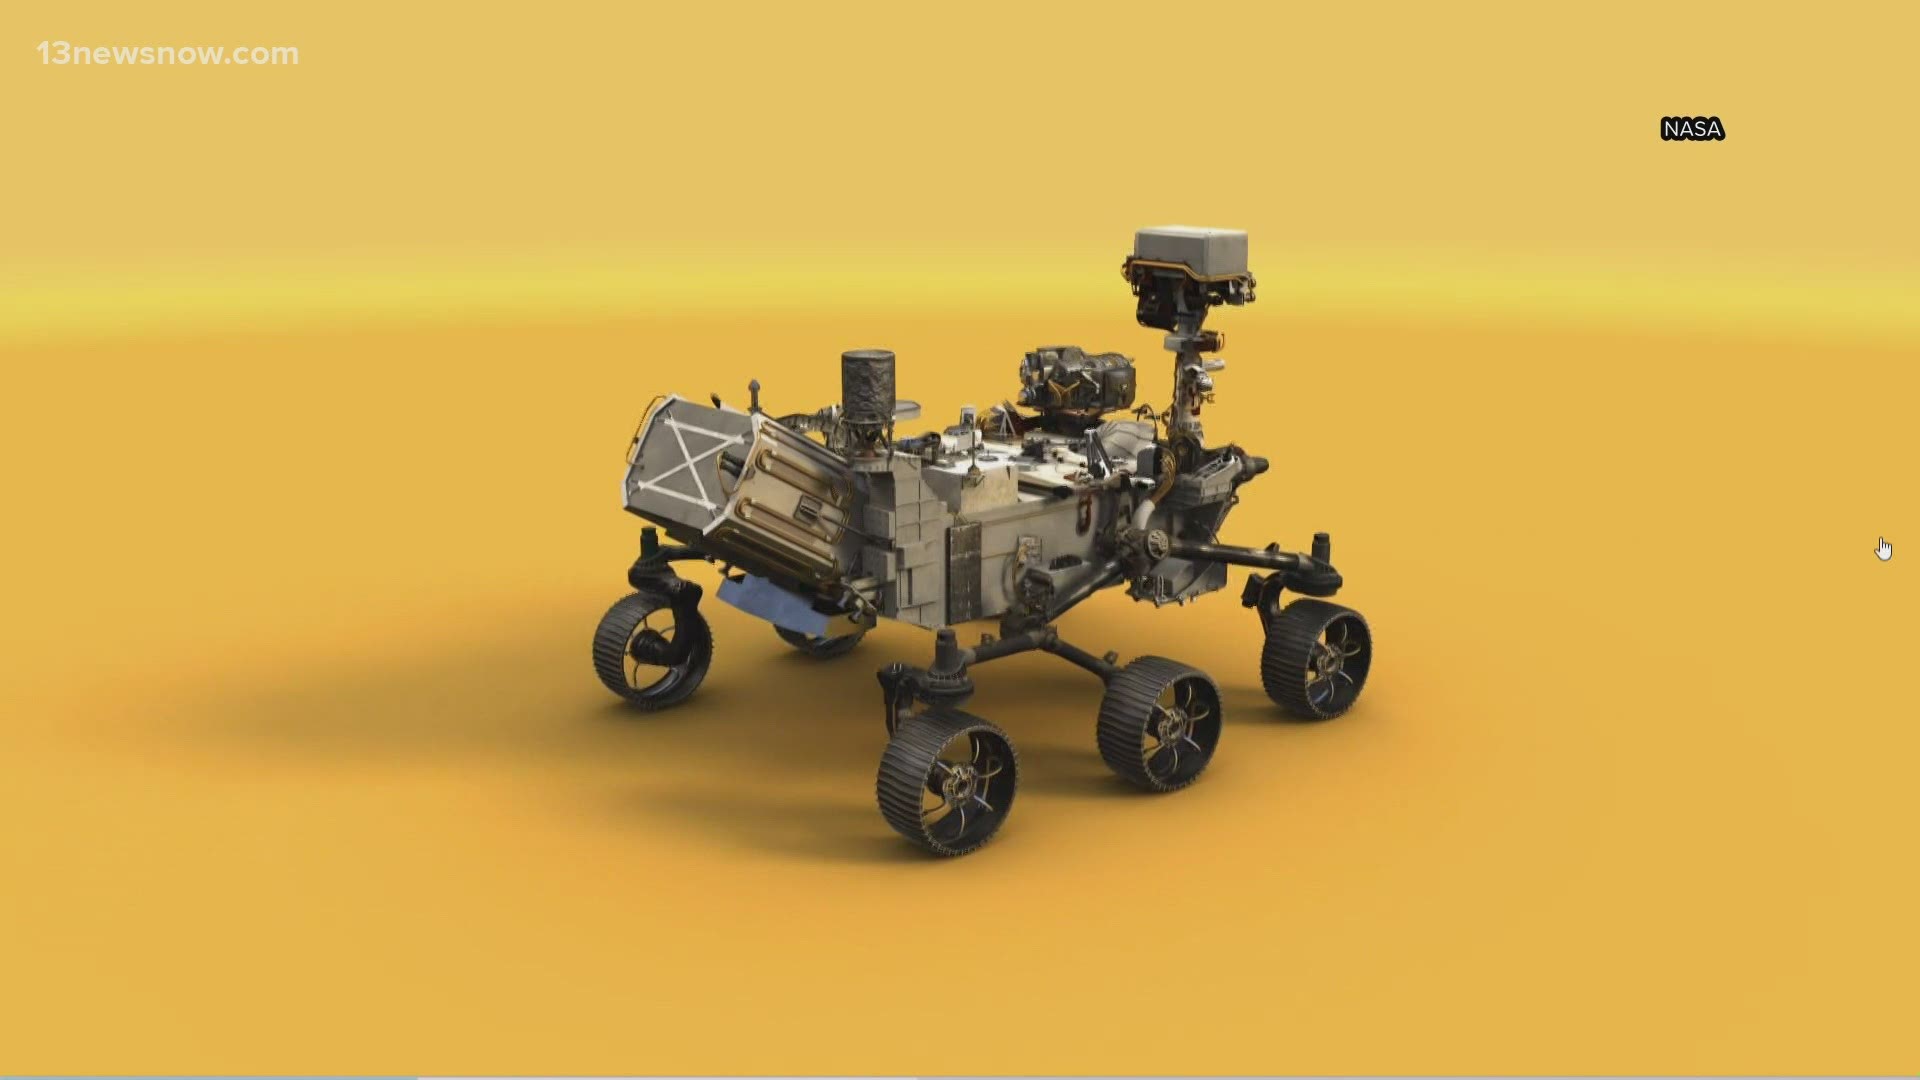 NASA's Mars 2020 Perseverance rover will look for signs of past microbial life